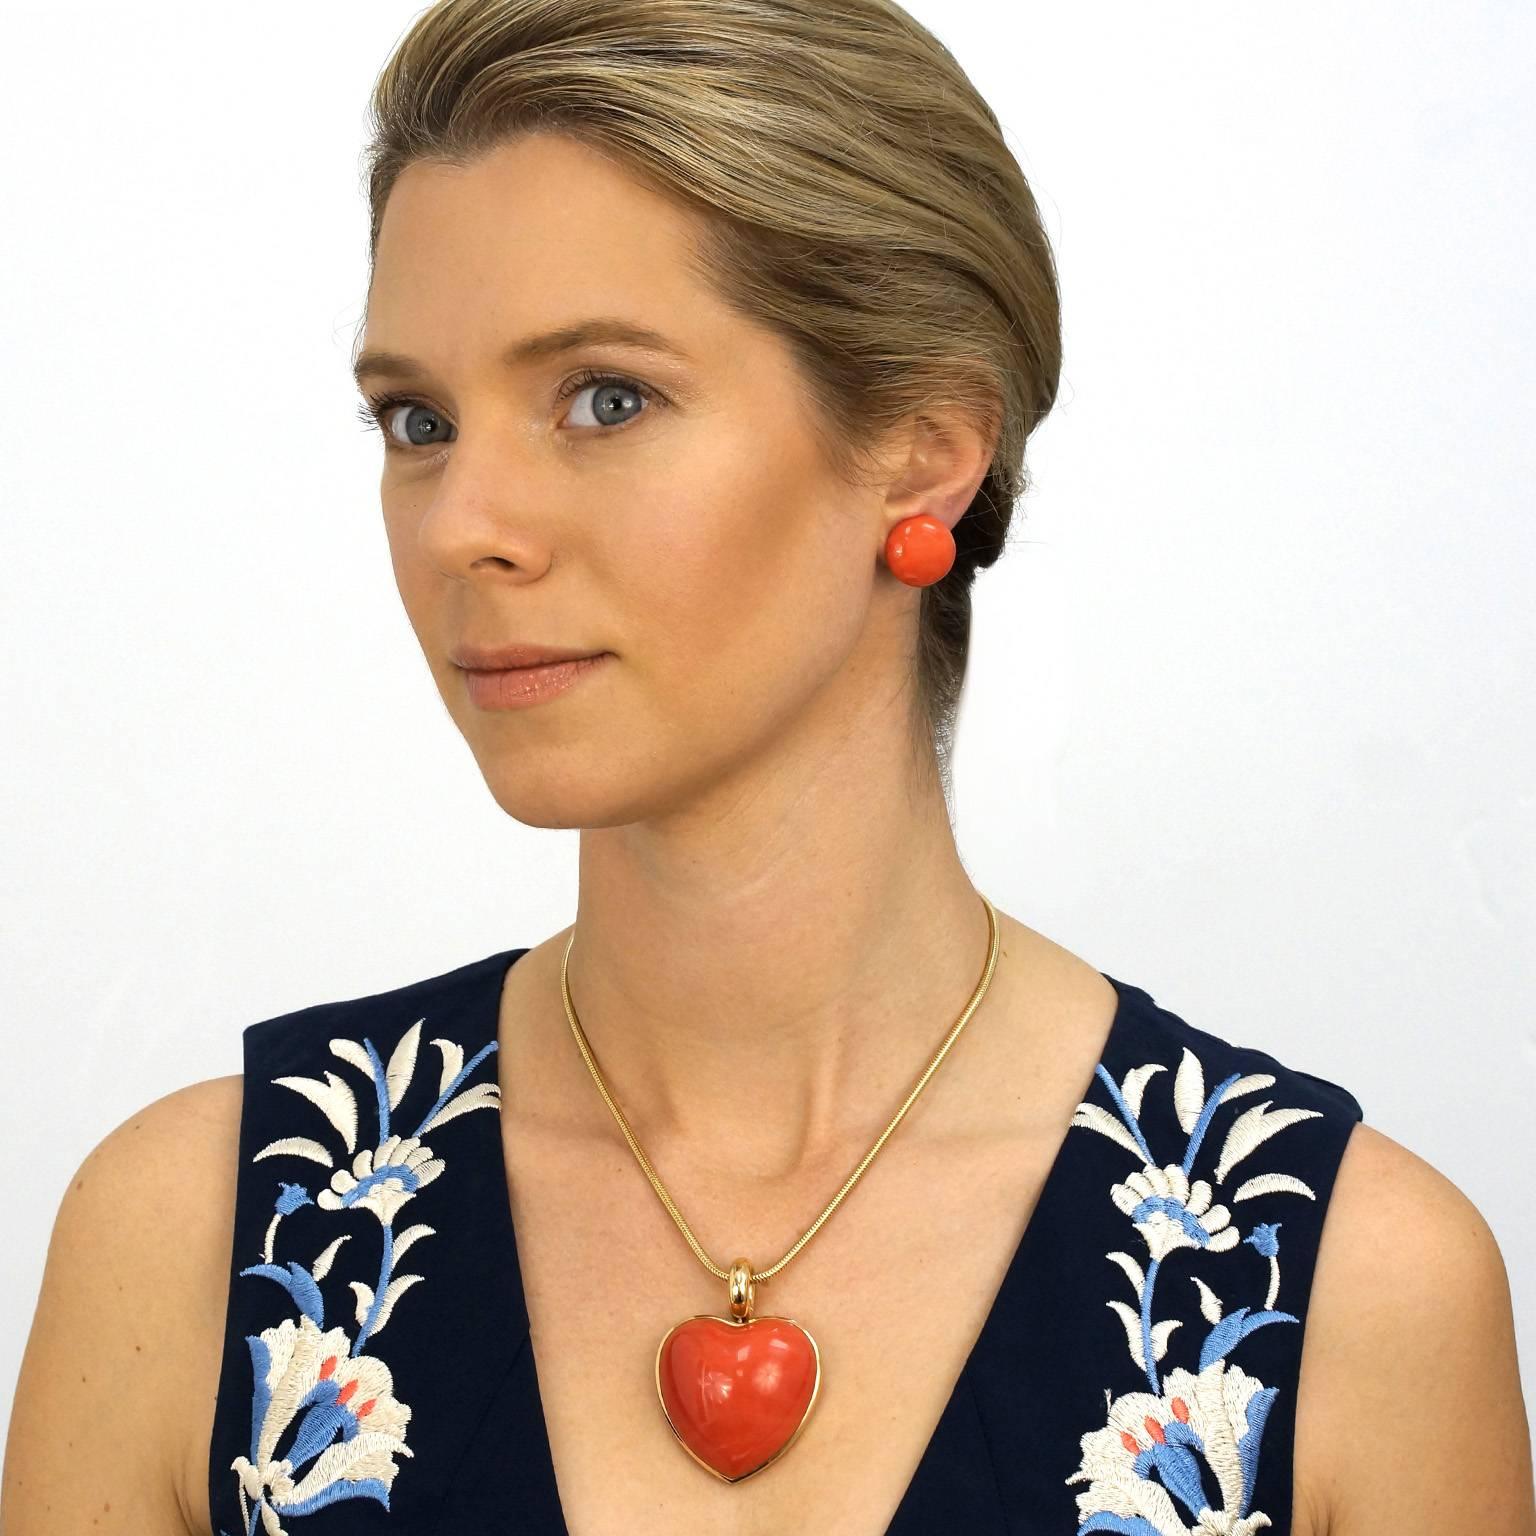 Circa 1950s, Attributed Italy.  A modernist take on the definitive button earring, these chic natural coral cabochons add a pop of lush color to any moment of fashion. Needing no artifice to achieve brilliant minimalism, the single brush stroke of